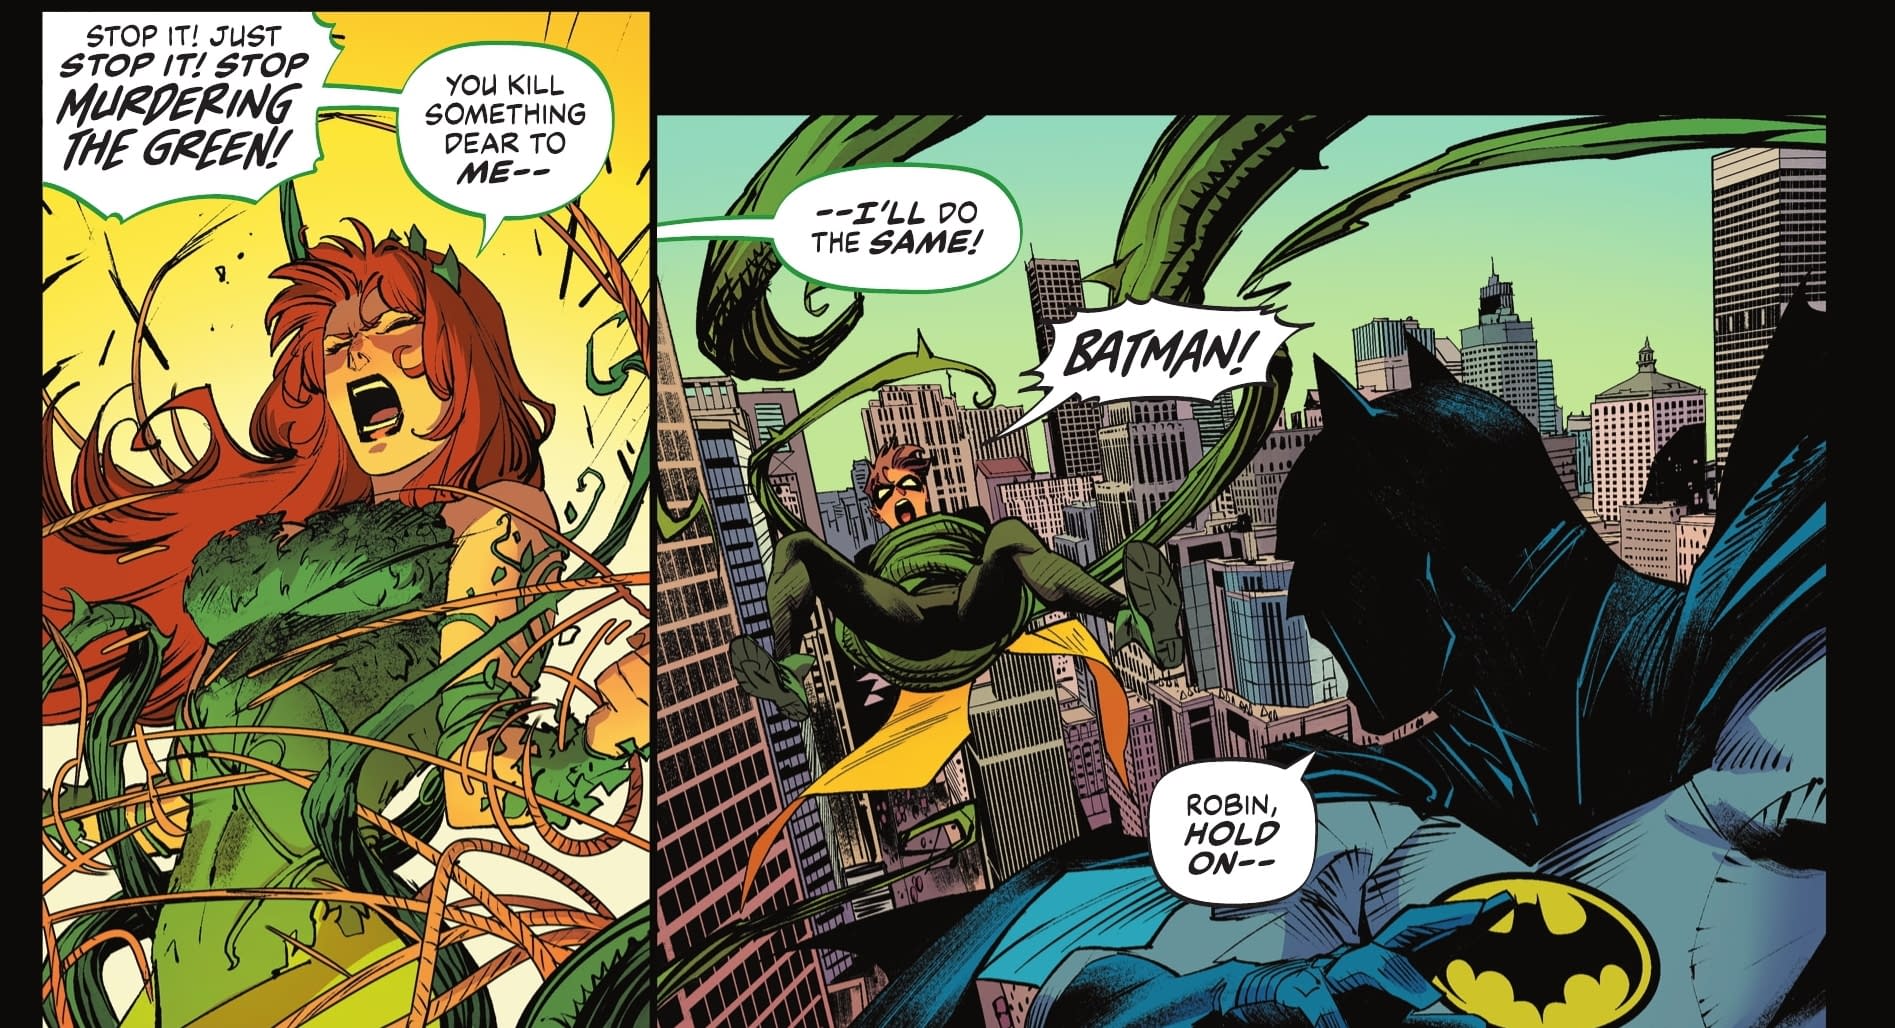 Even Robin Objects To How DC Comics Portrays Poison Ivy (Spoilers)